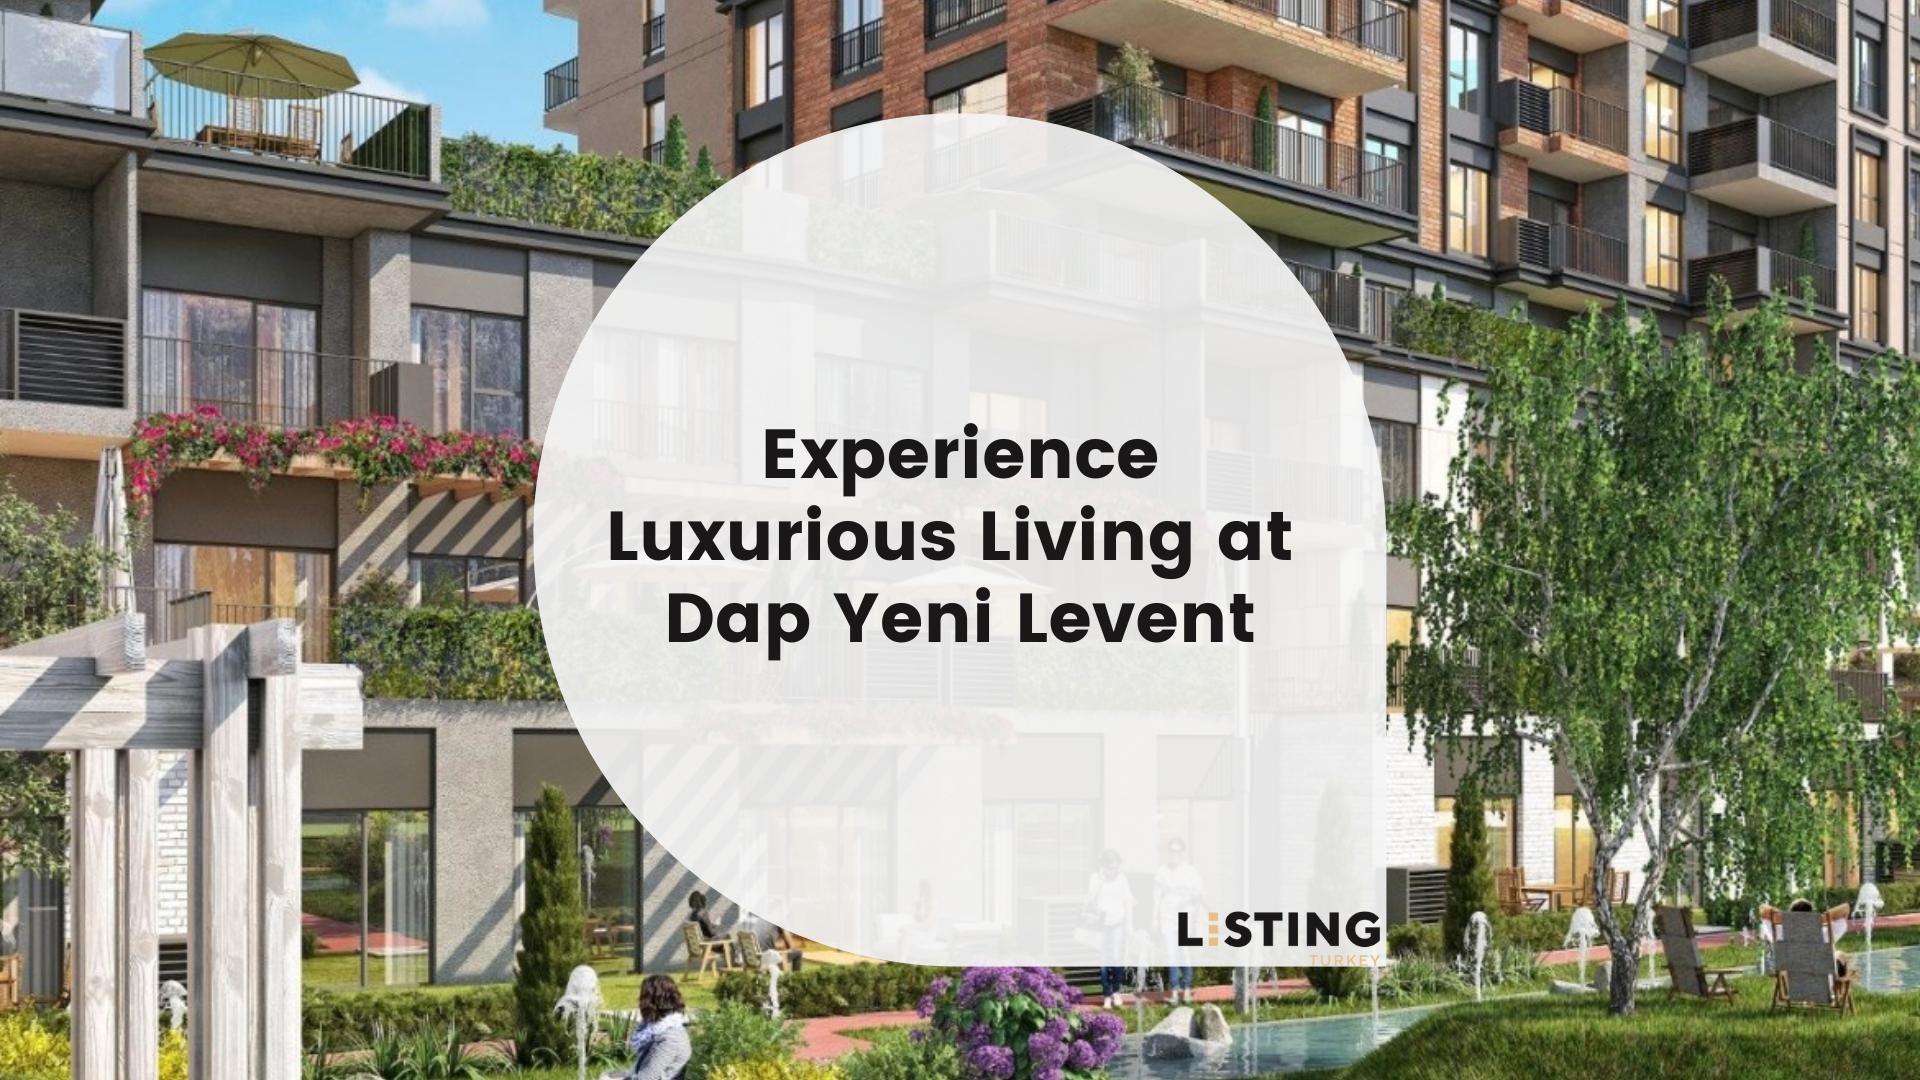 Experience Luxurious Living at Dap Yeni Levent